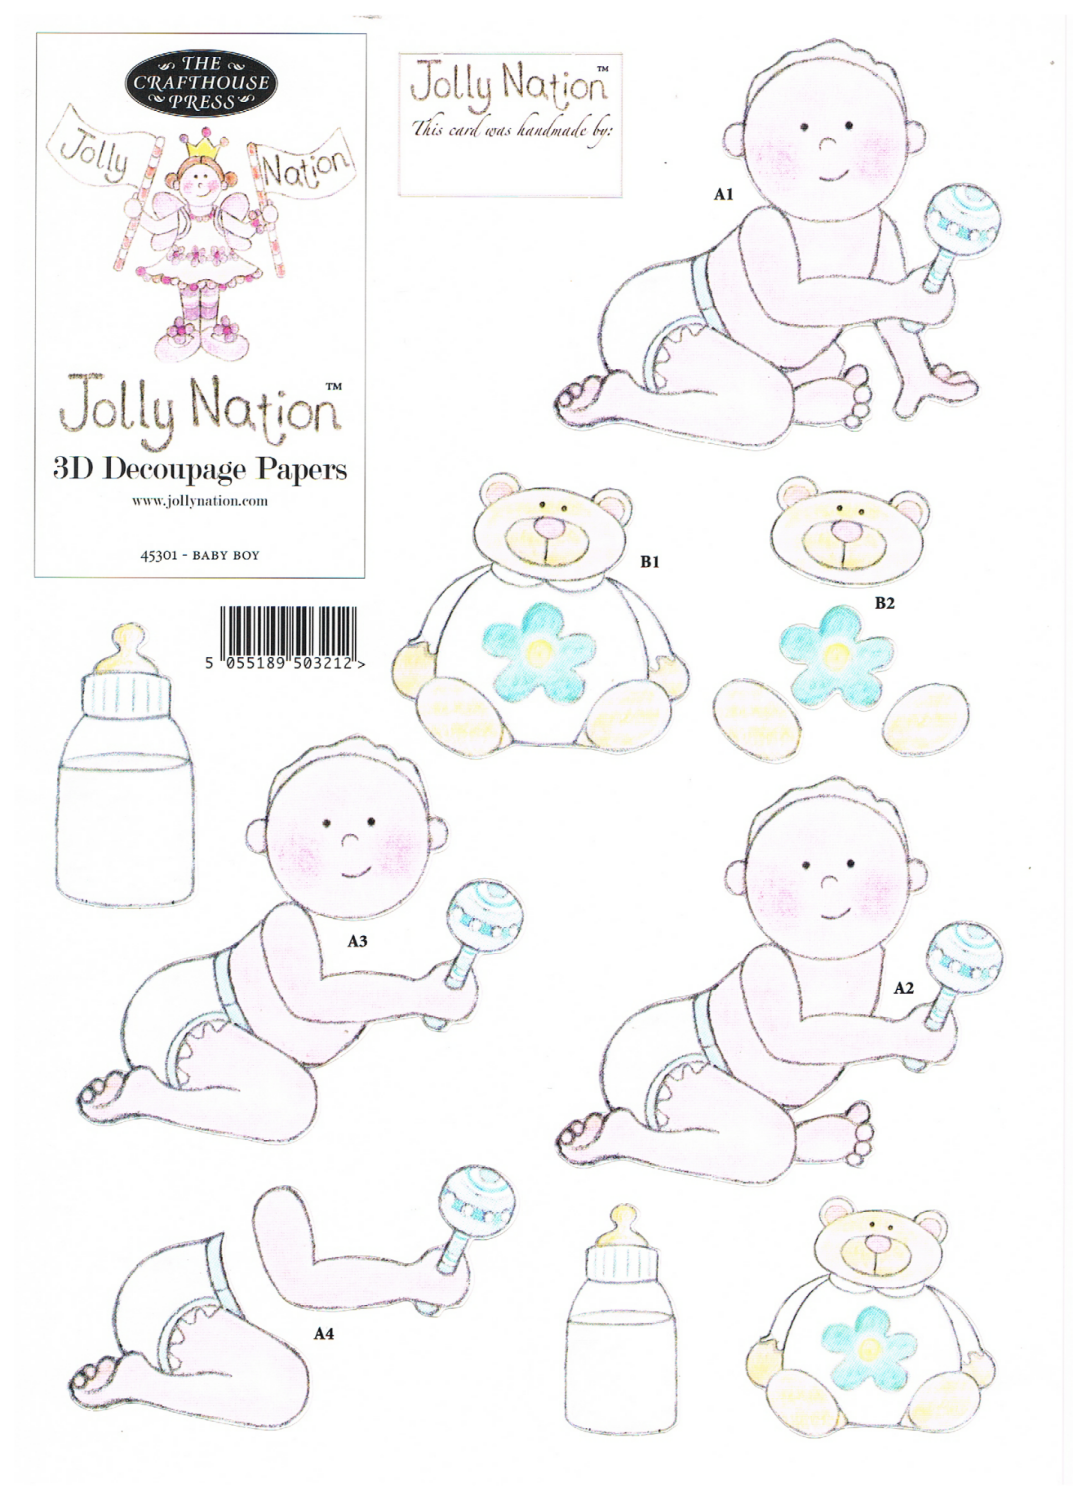 Jolly Nation - Baby Boy 45301 decoupage with FREE backing paper